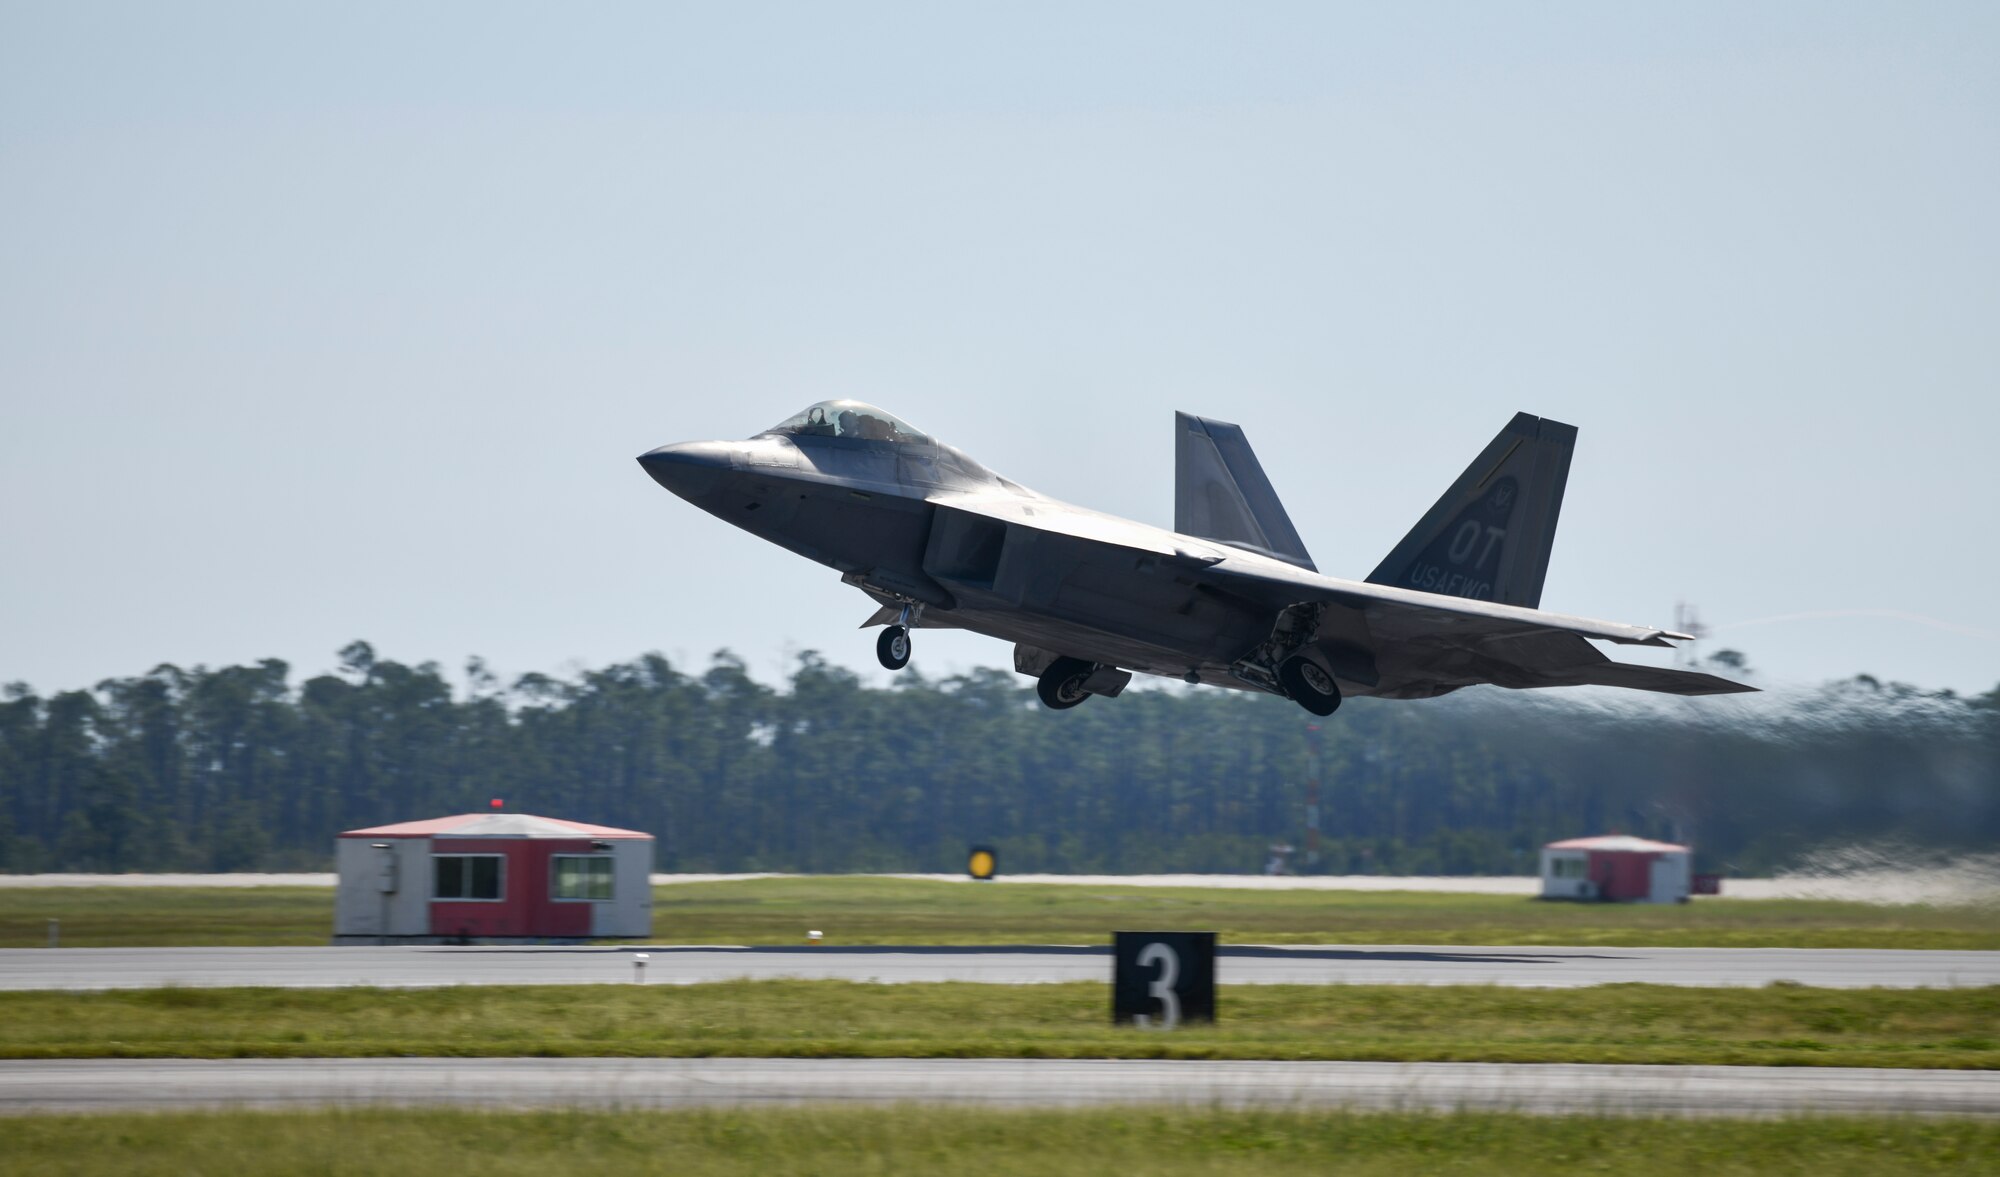 A U.S. Air Force F-22 Raptor Operational Test aircraft assigned to Nellis Air Force Base, Nevada, launches from the flight line at Tyndall Air Force Base, Florida, Sept. 18, 2020. Tyndall hosted a Weapons System Evaluation Program on behalf of Air Combat Command to utilize the invaluable air space over the Gulf of Mexico. (U.S. Air Force photo by Senior Airman Stefan Alvarez)